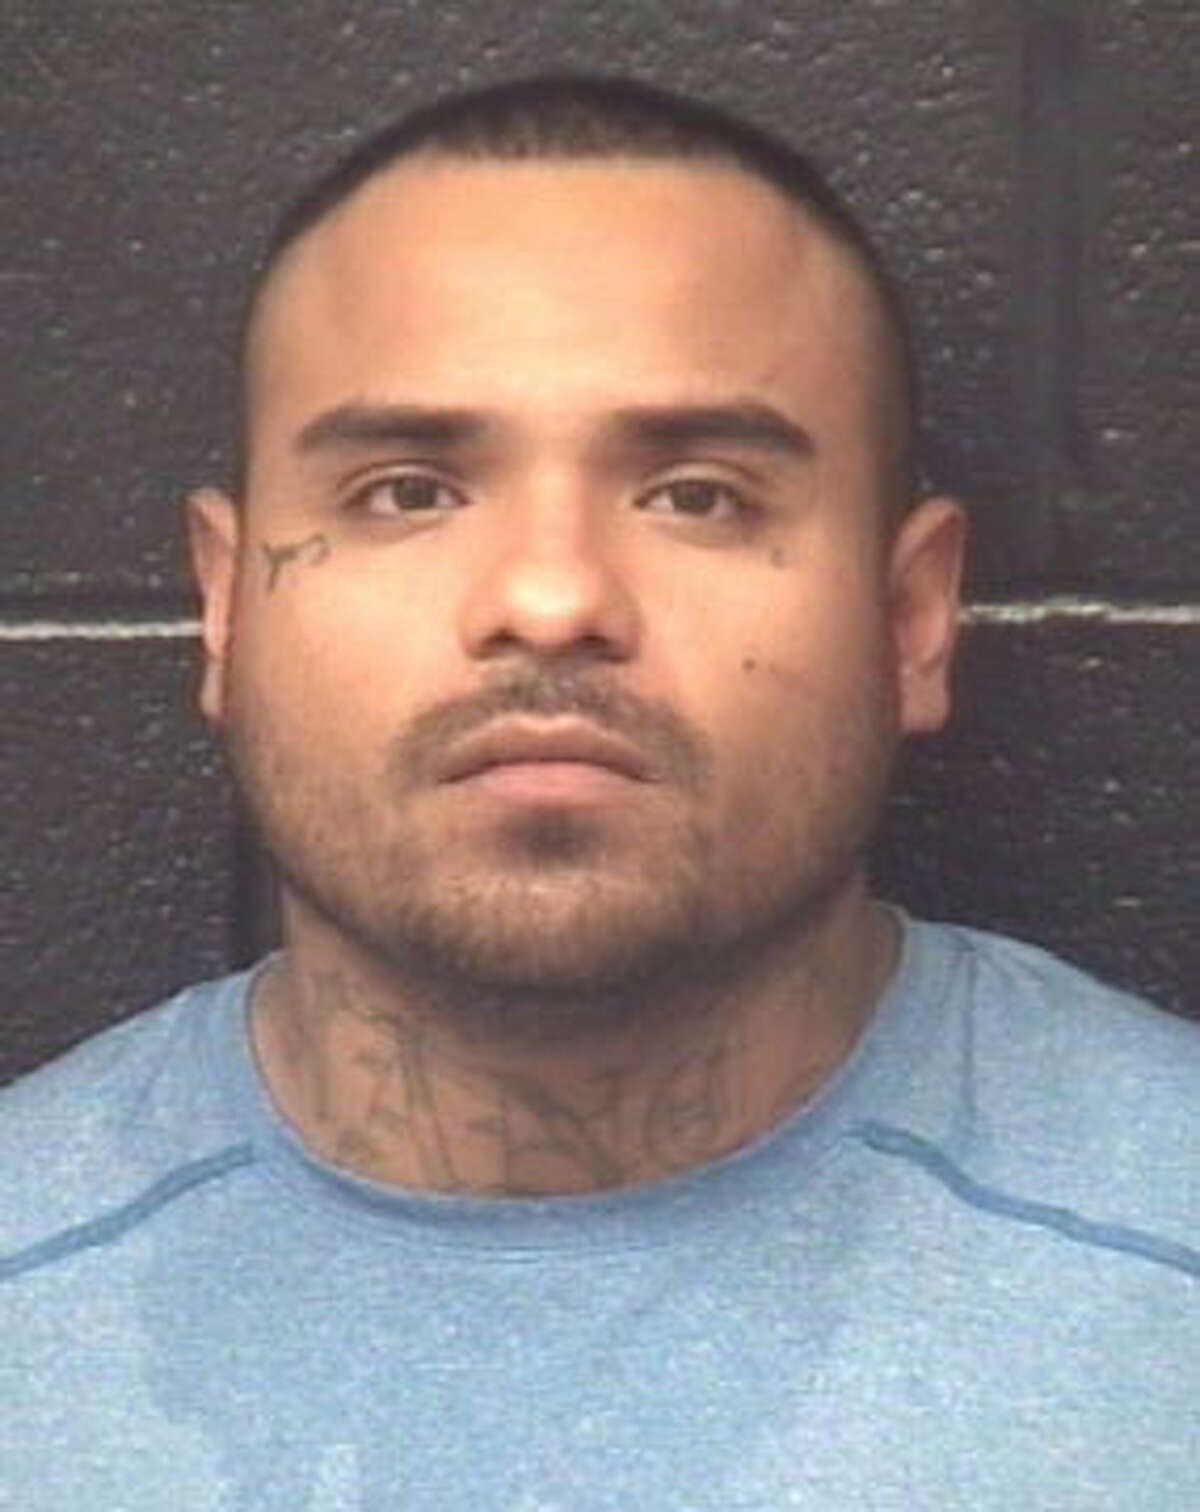 Jose Angel Rosas III, 32, is wanted for burglary of a habitation and theft.